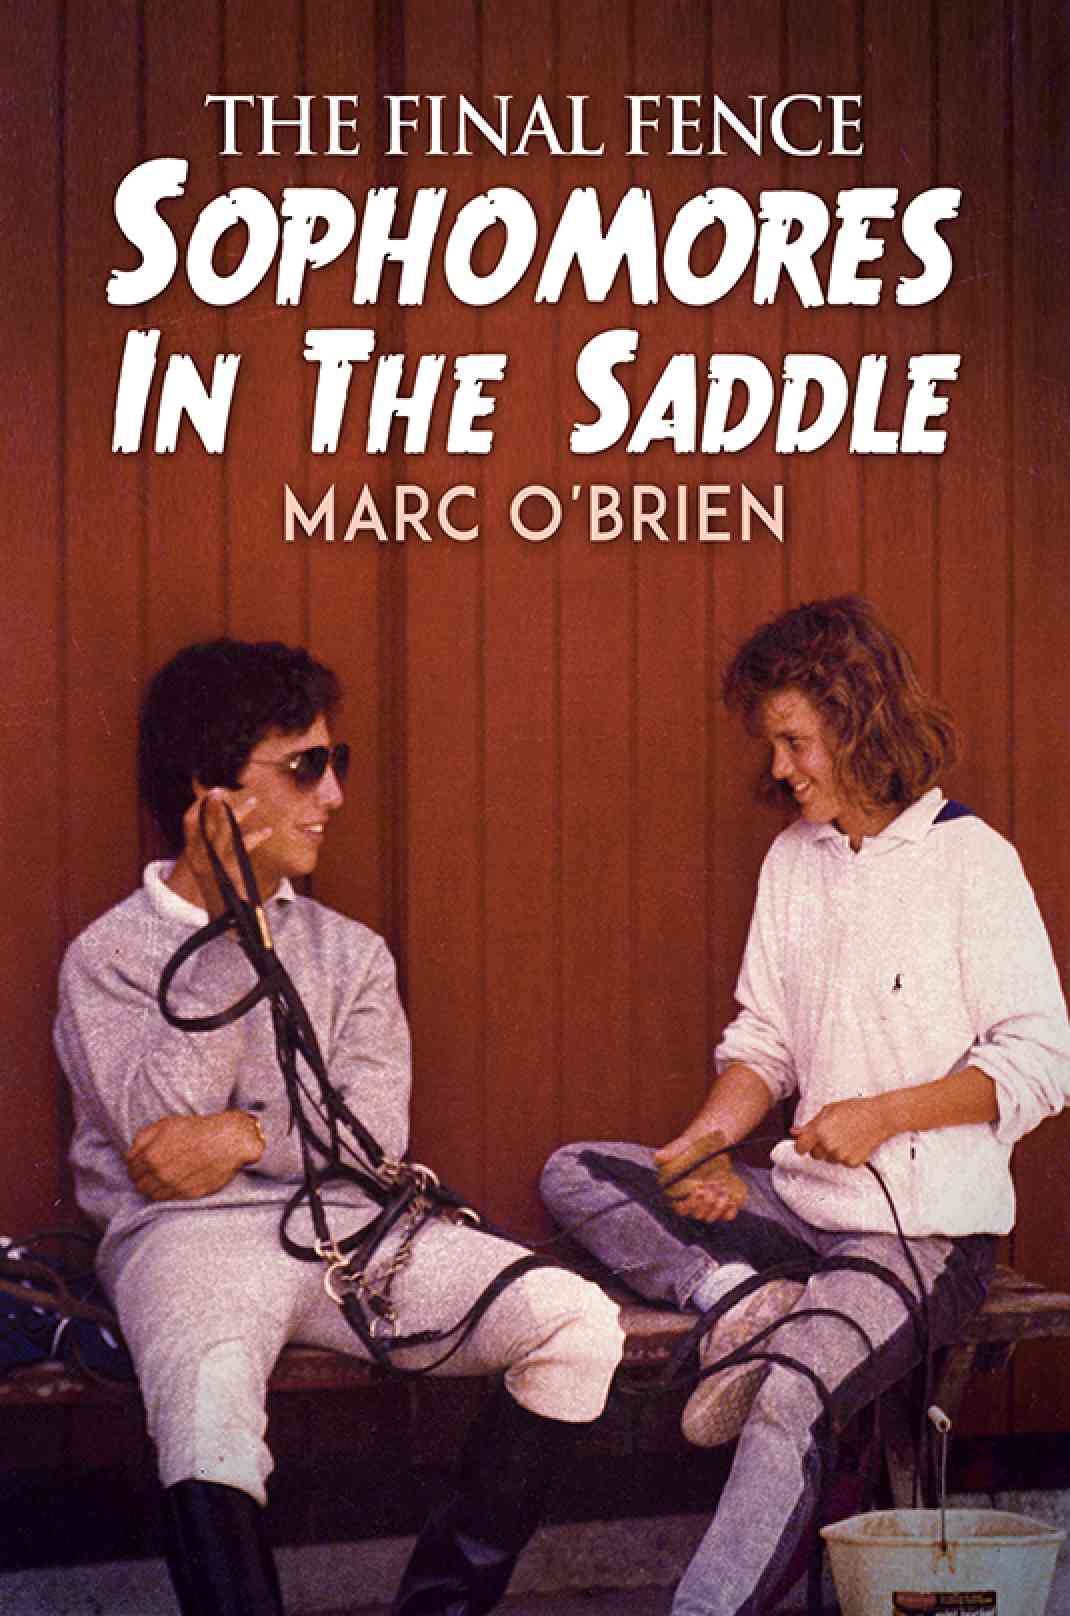 The Author of The Final Fence: Sophomores In The Saddle, Marc O’Brien, Featured in a Podcast